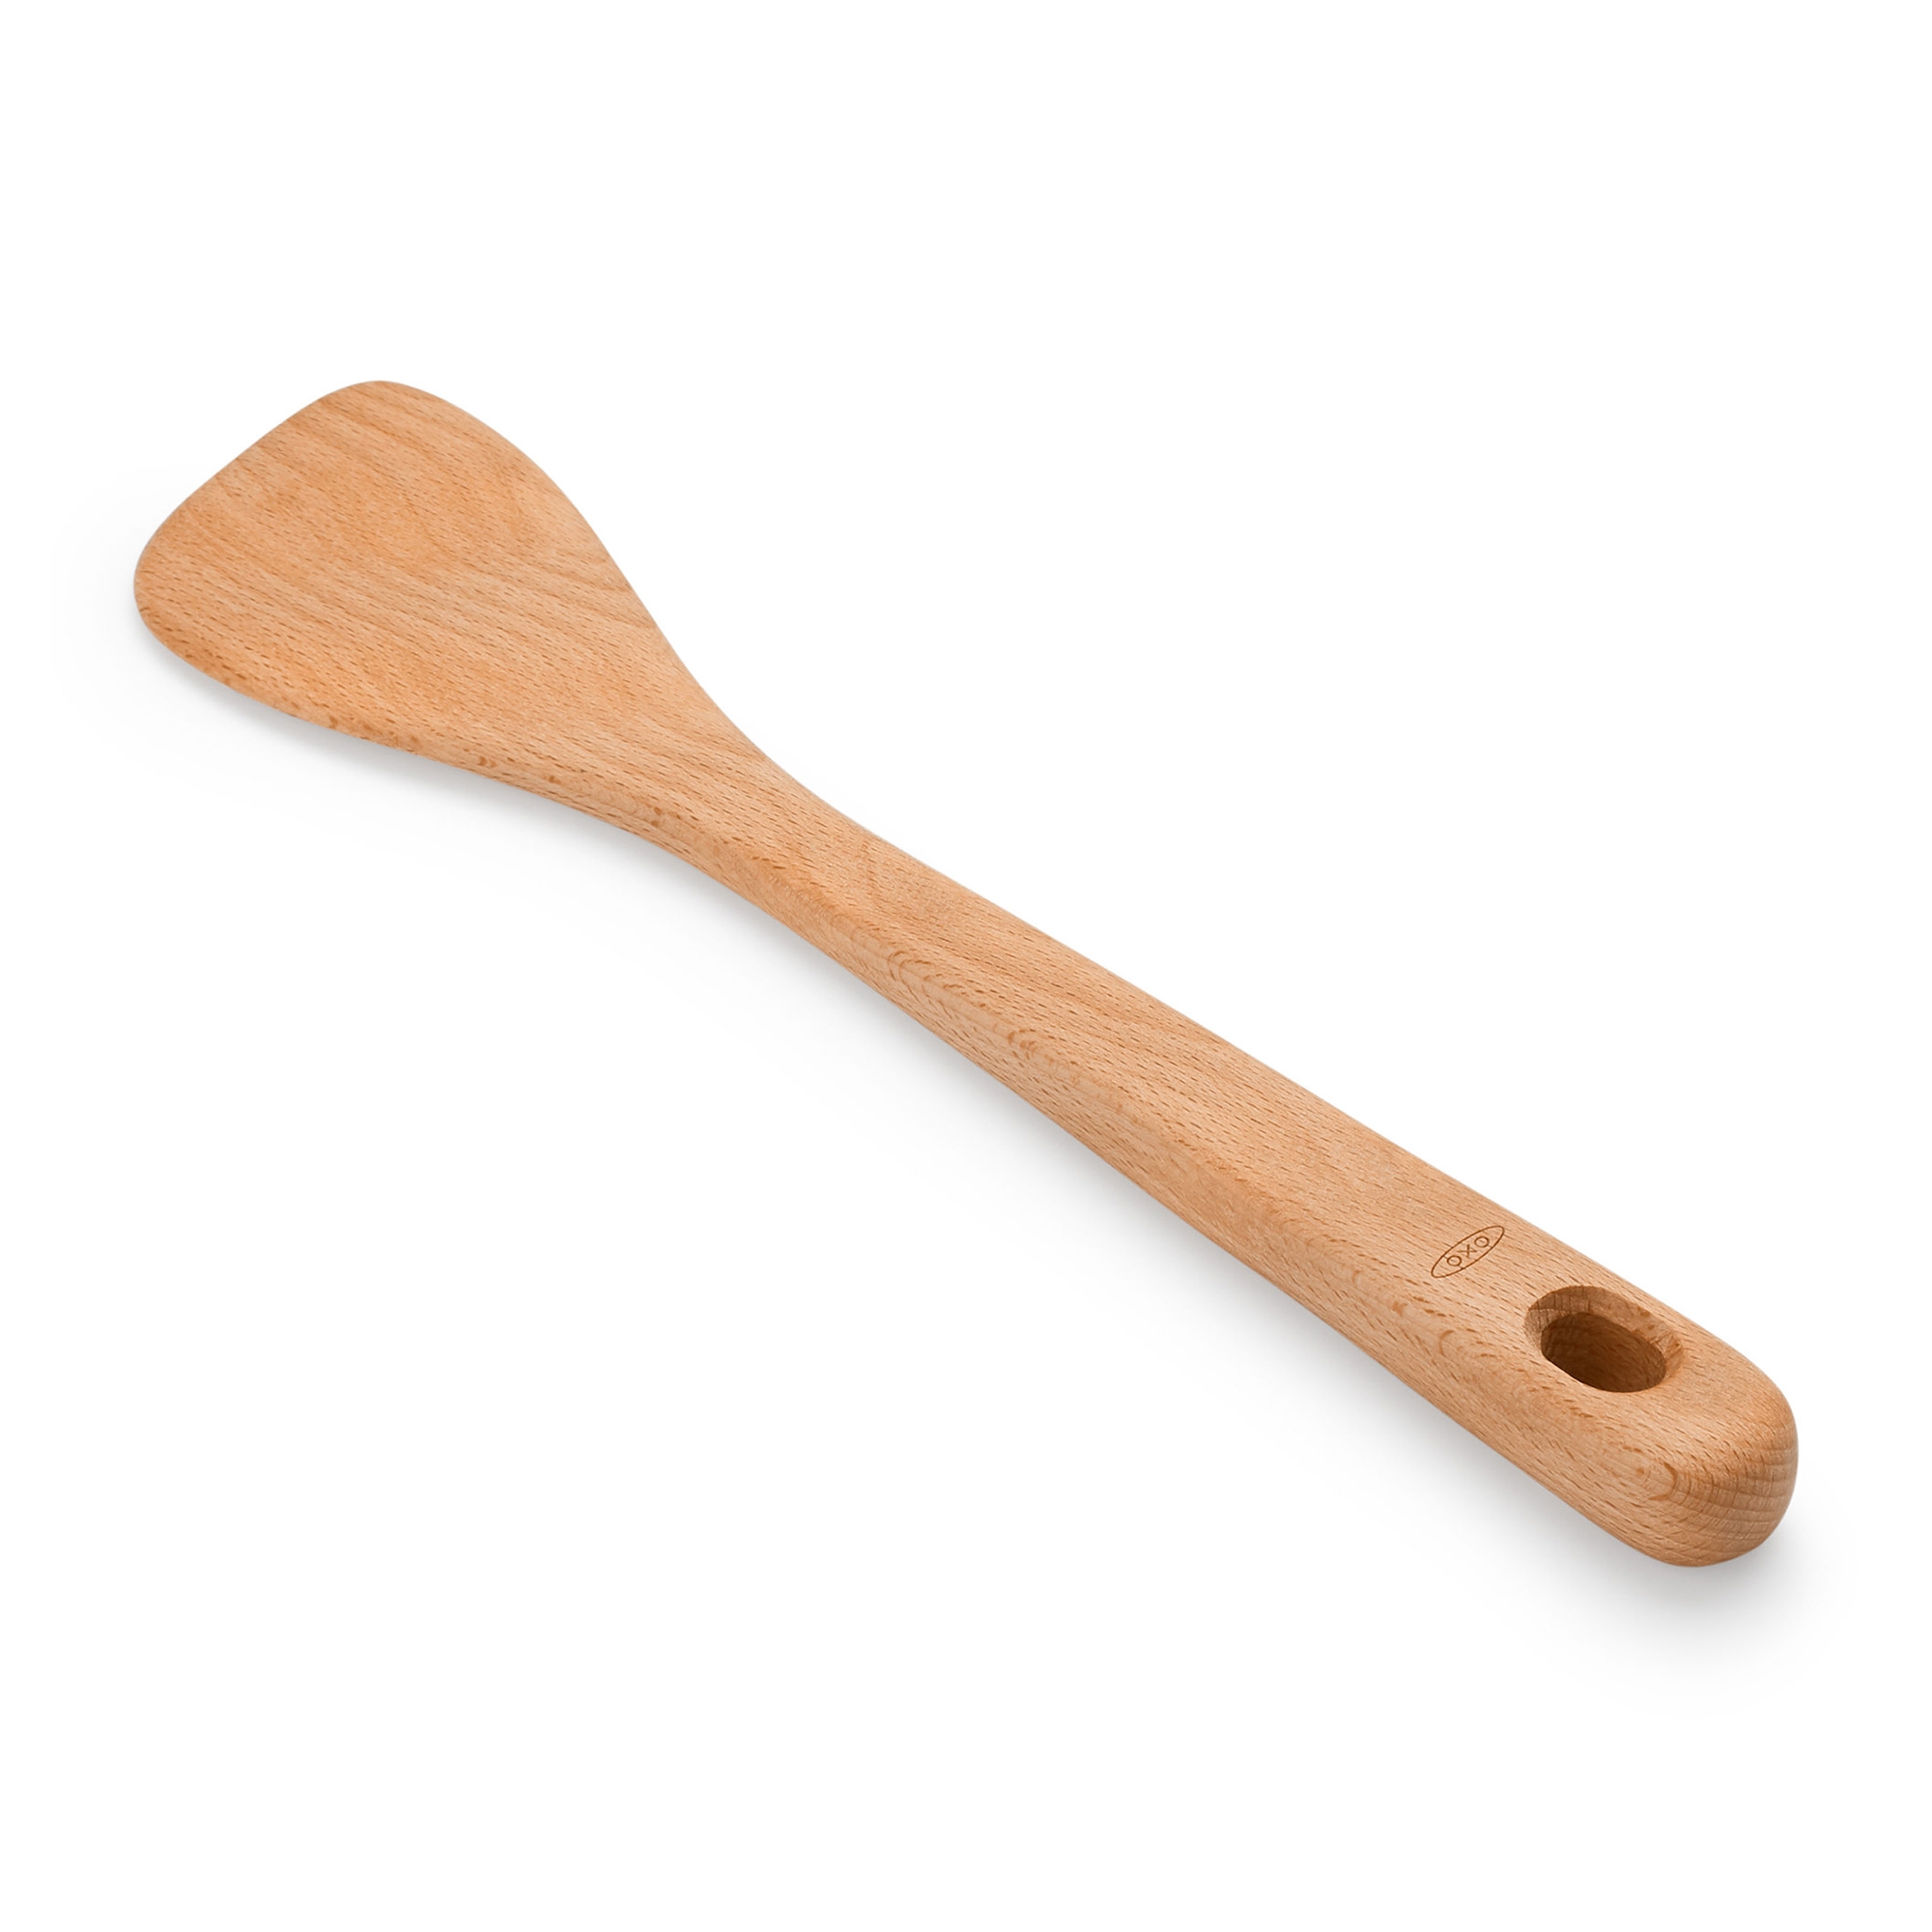 OXO Good Grips Wooden Saute Paddle Image 2